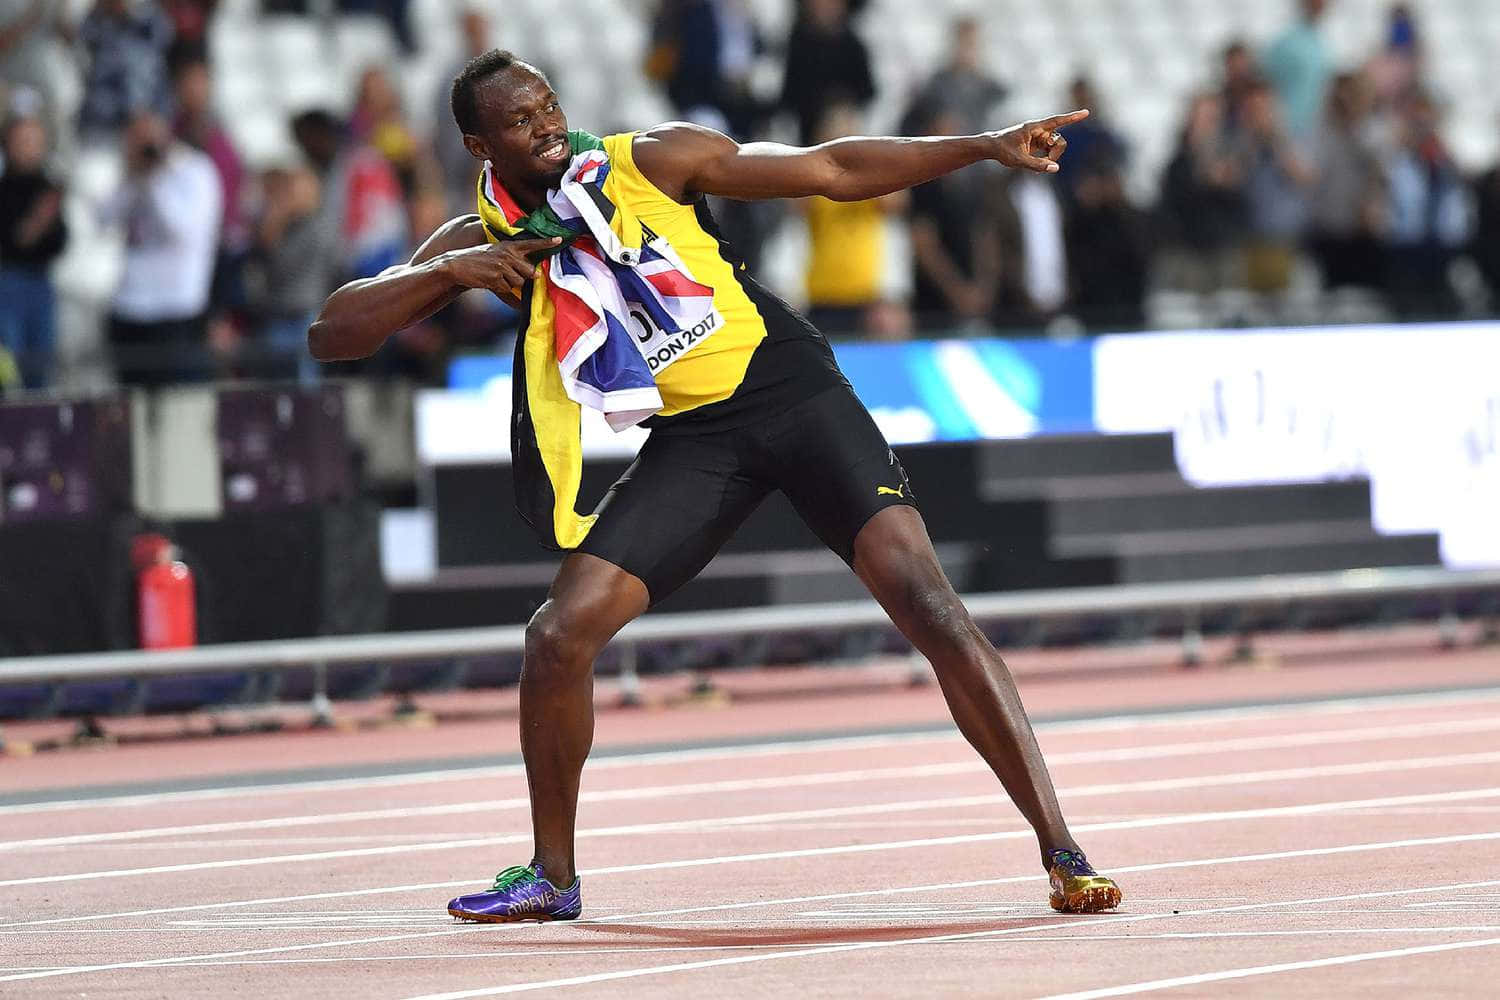 Usain Bolt's Retirement: 5 Fast Facts You Need to Know